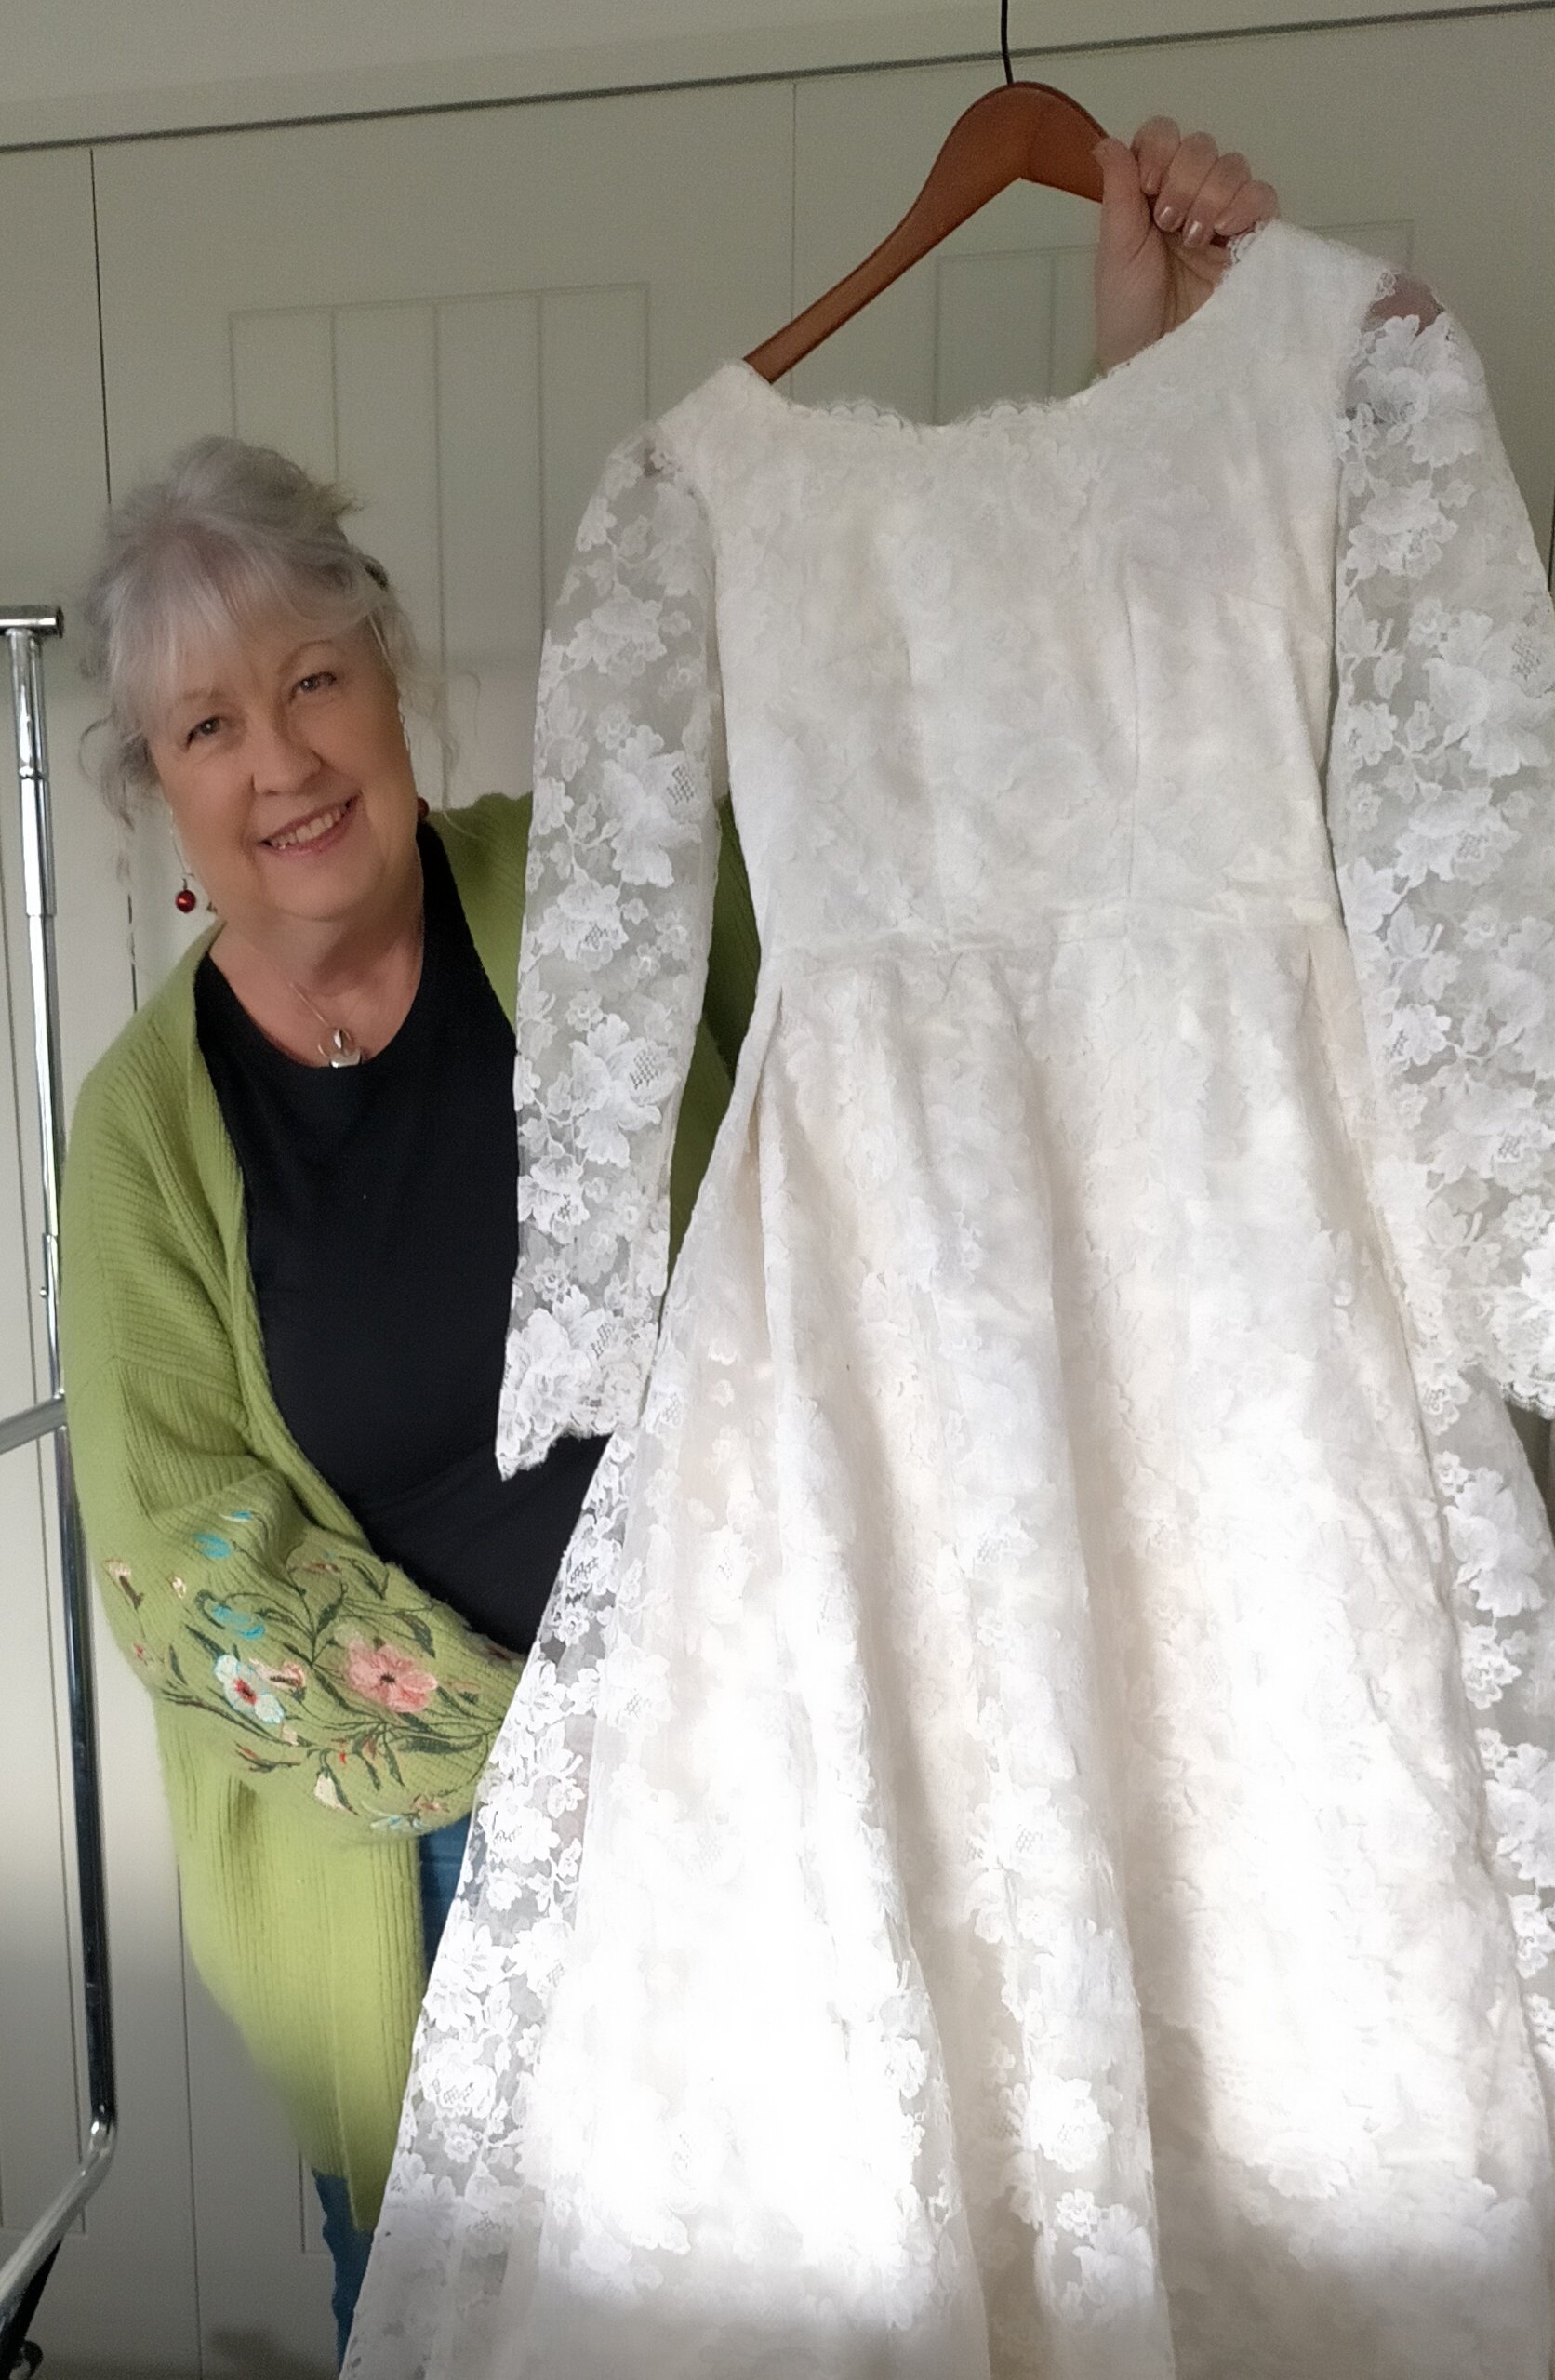 Ange Gibbs holds a wedding gown worn by Coralie Heads on her wedding day in 1965. PHOTO: SUPPLIED